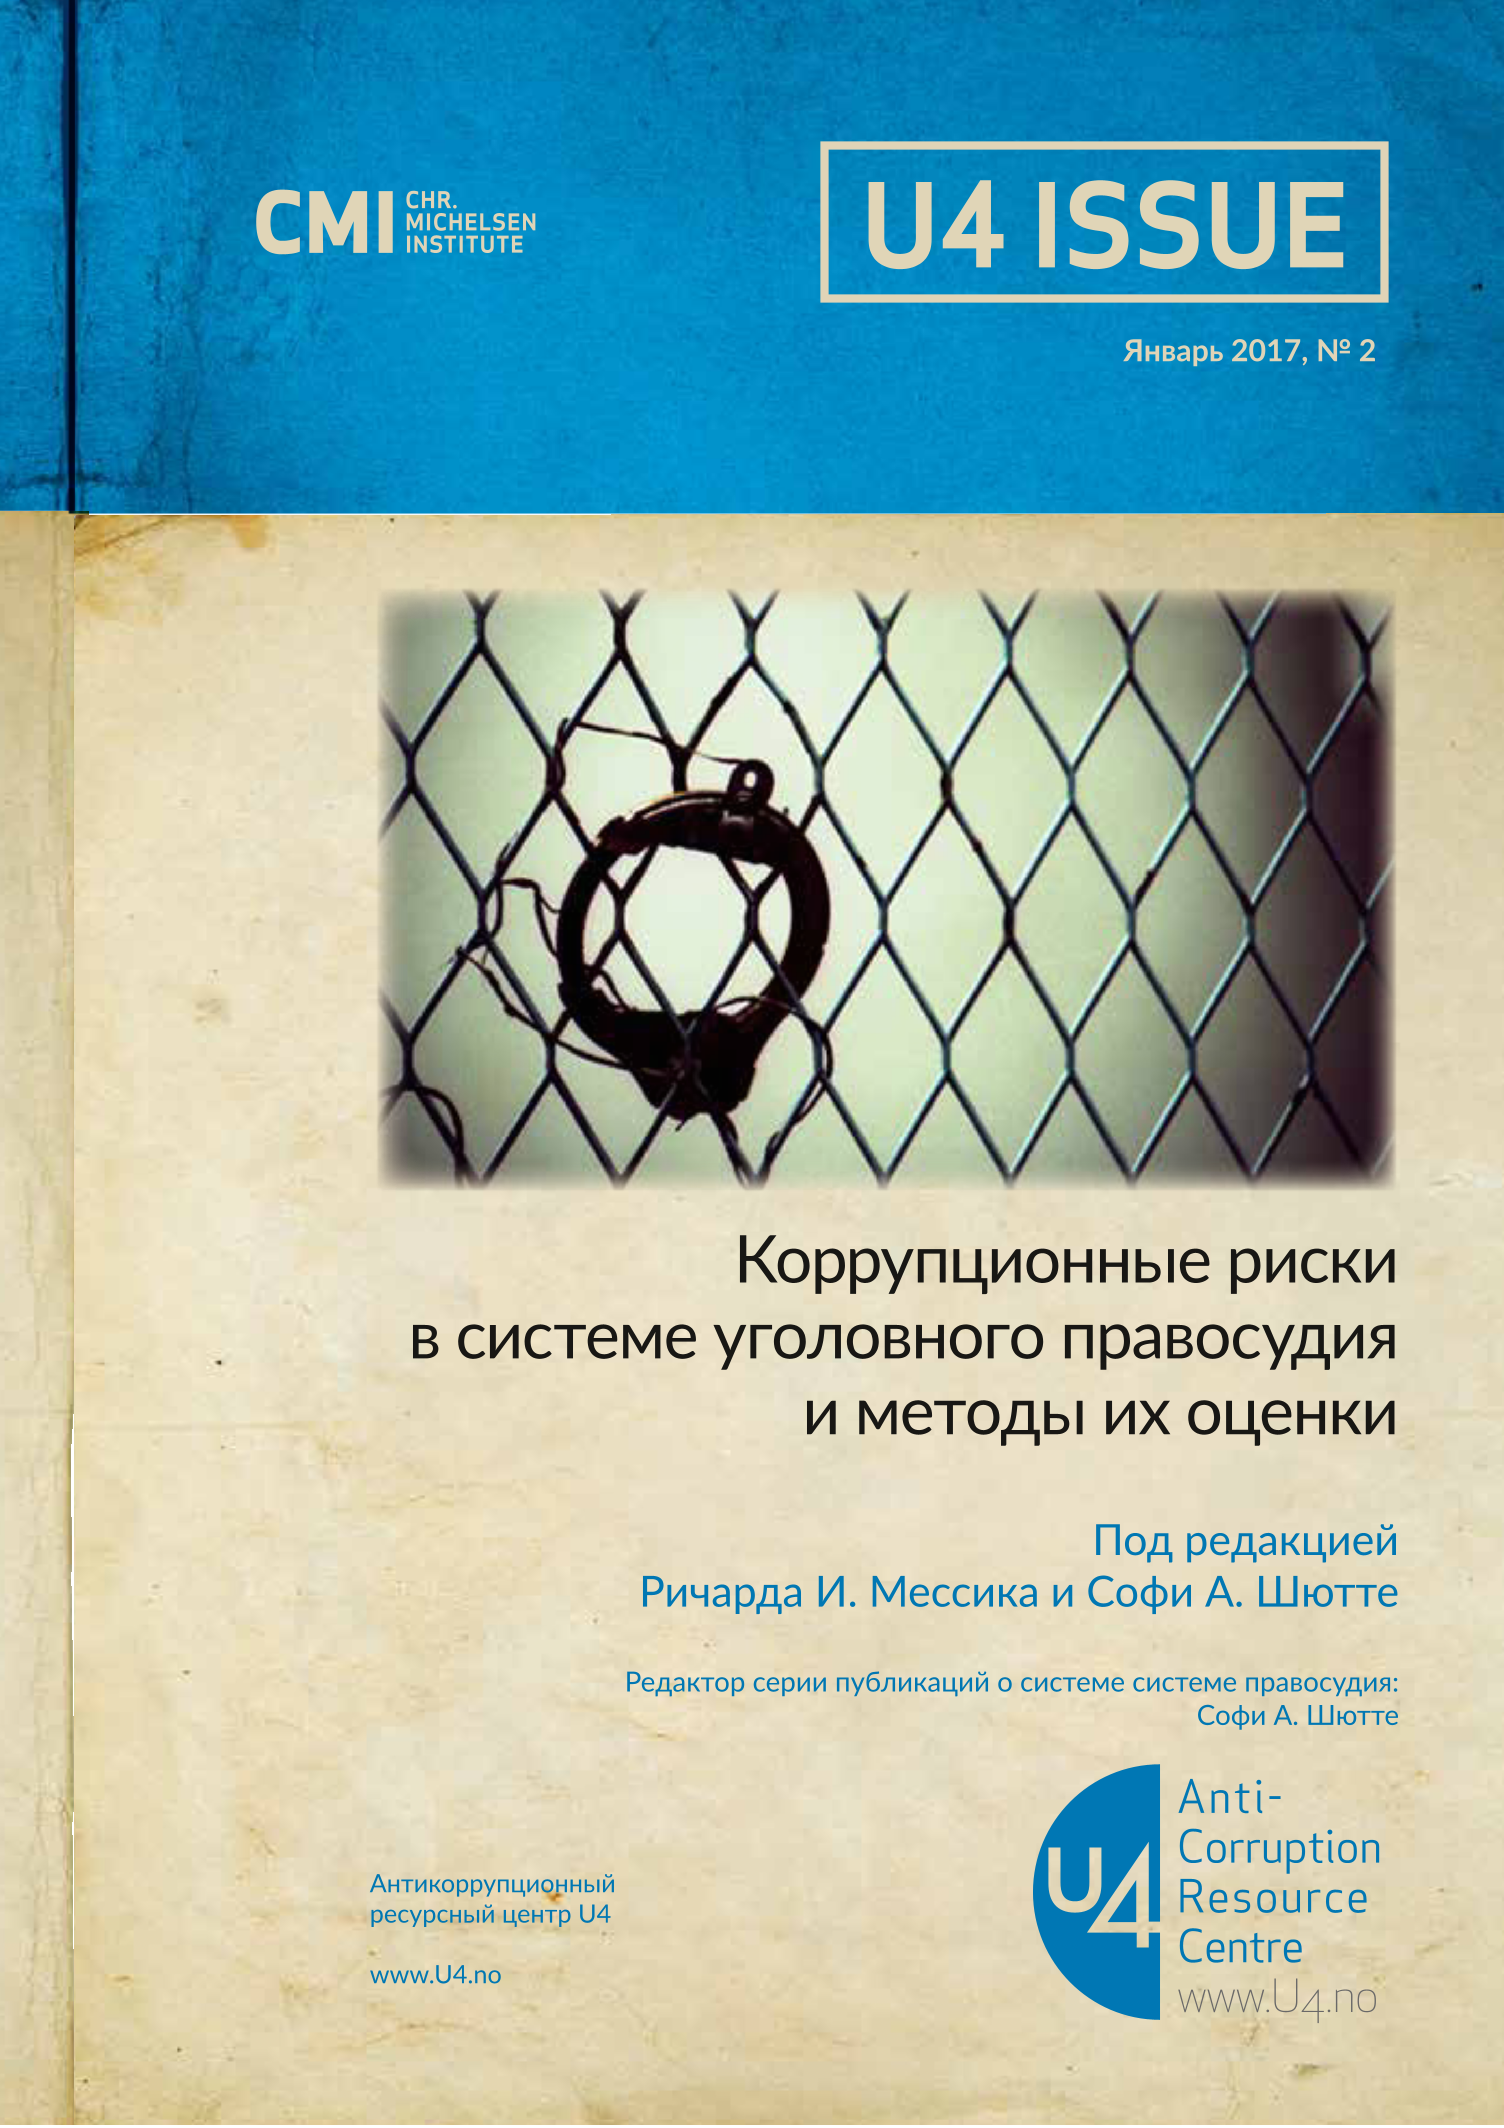 Corruption risks in the criminal justice chain and tools for assessment (Russian version)